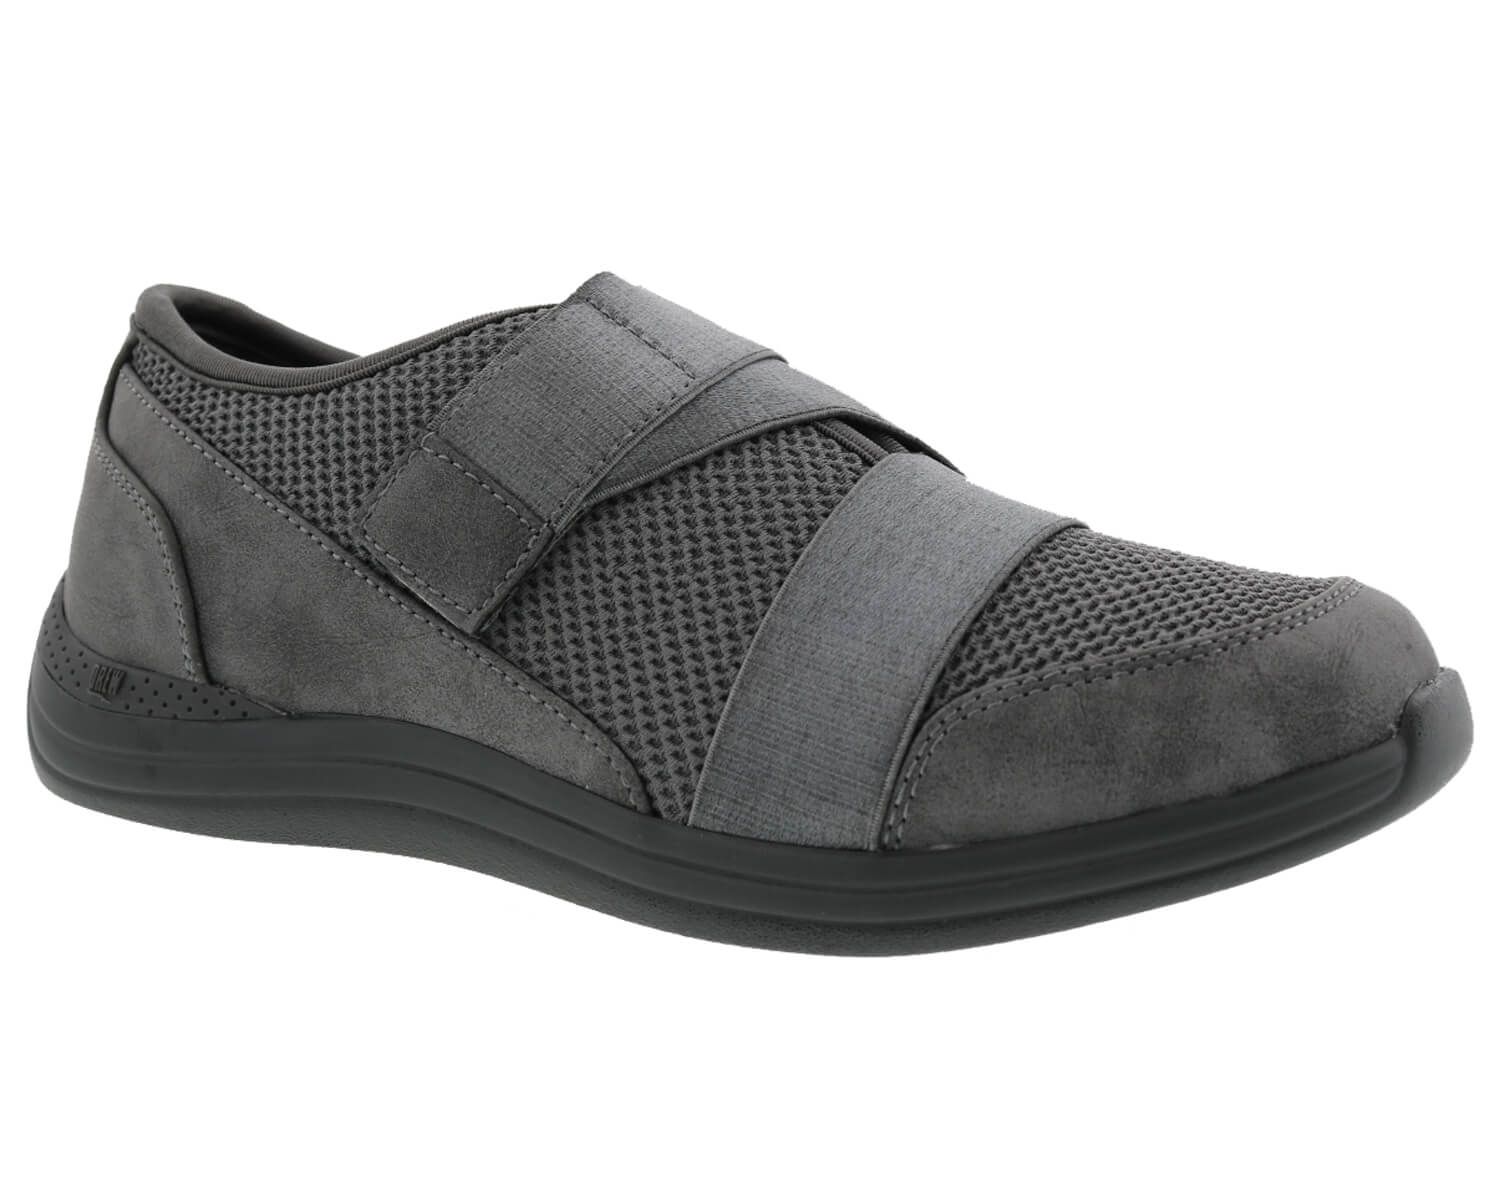 Drew Shoes Aster 14803 - Women's Casual Shoe - Comfort Orthopedic Diabetic Shoe - Extra Depth - Extra Wide